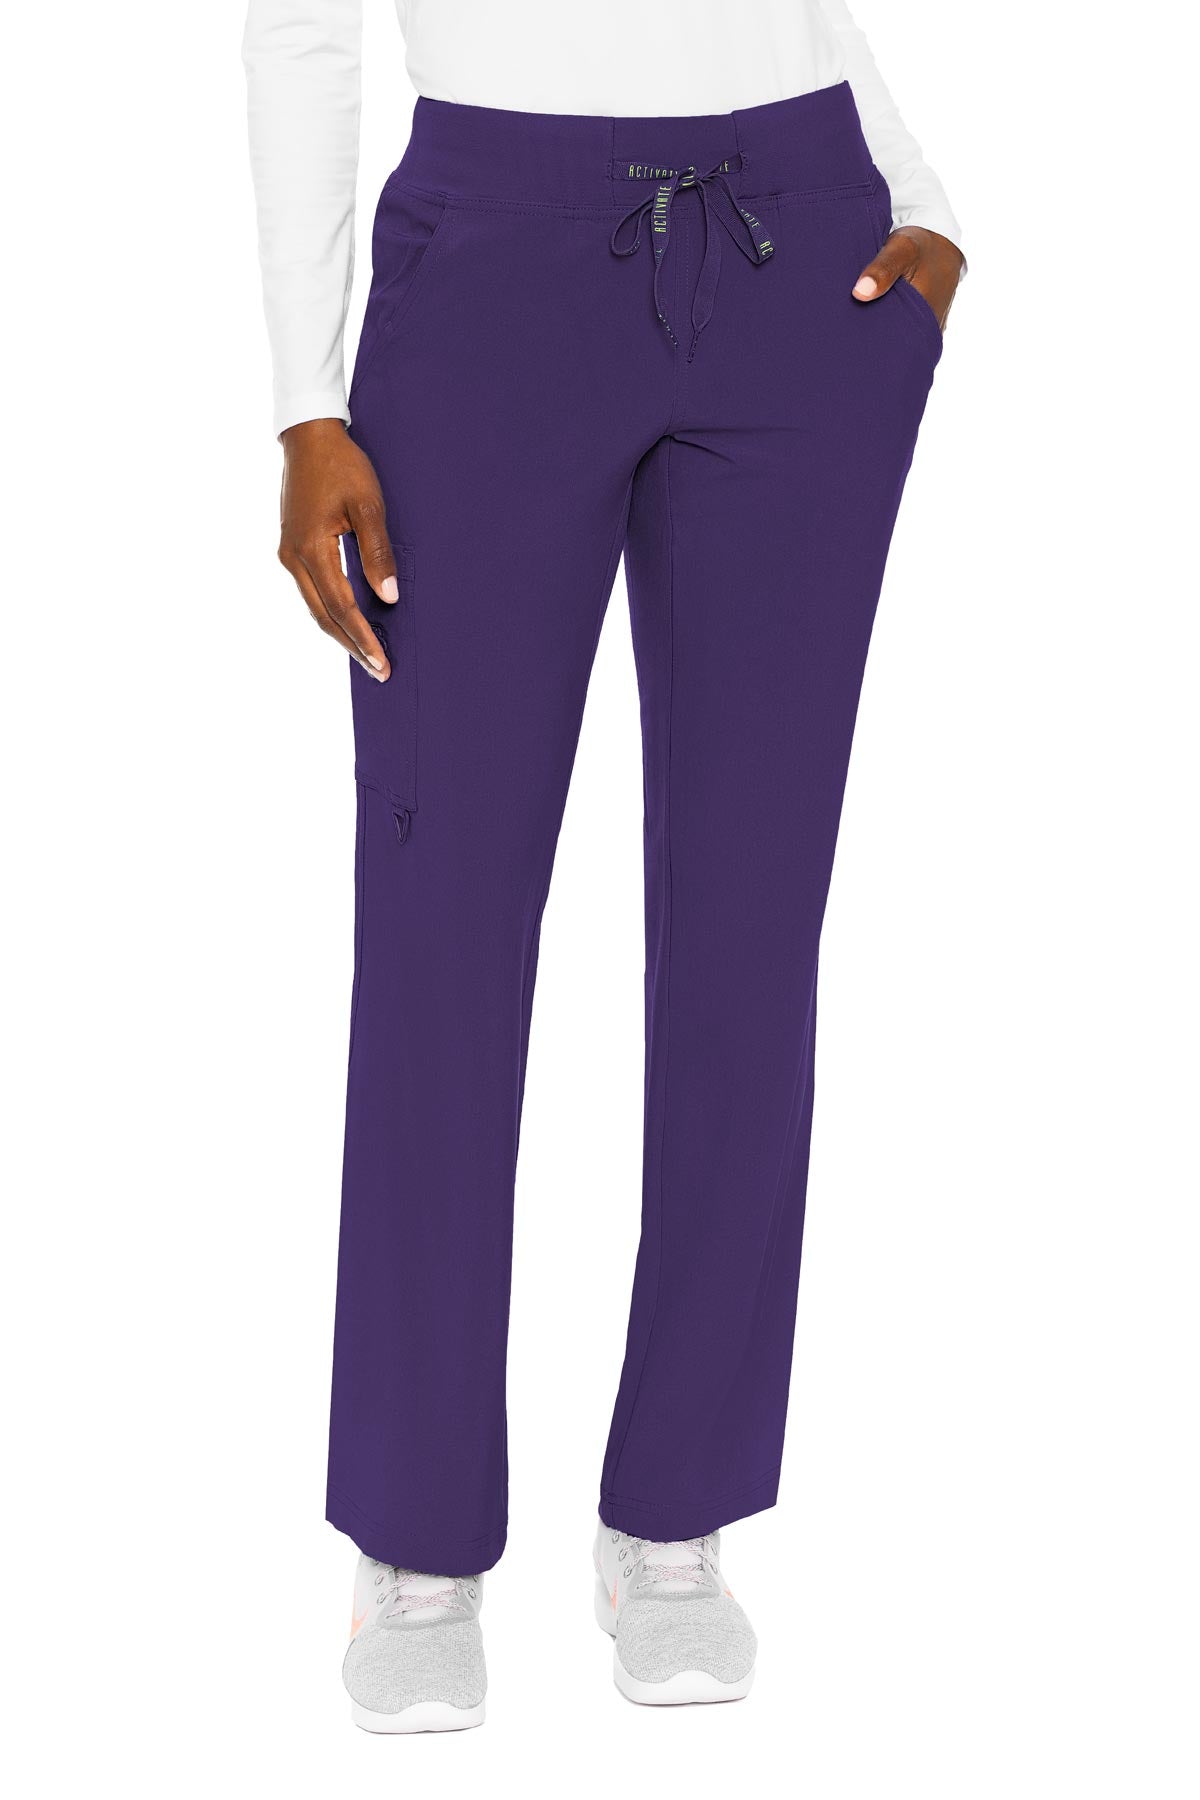 Med Couture Yoga Single Cargo Pocket Pant (T)